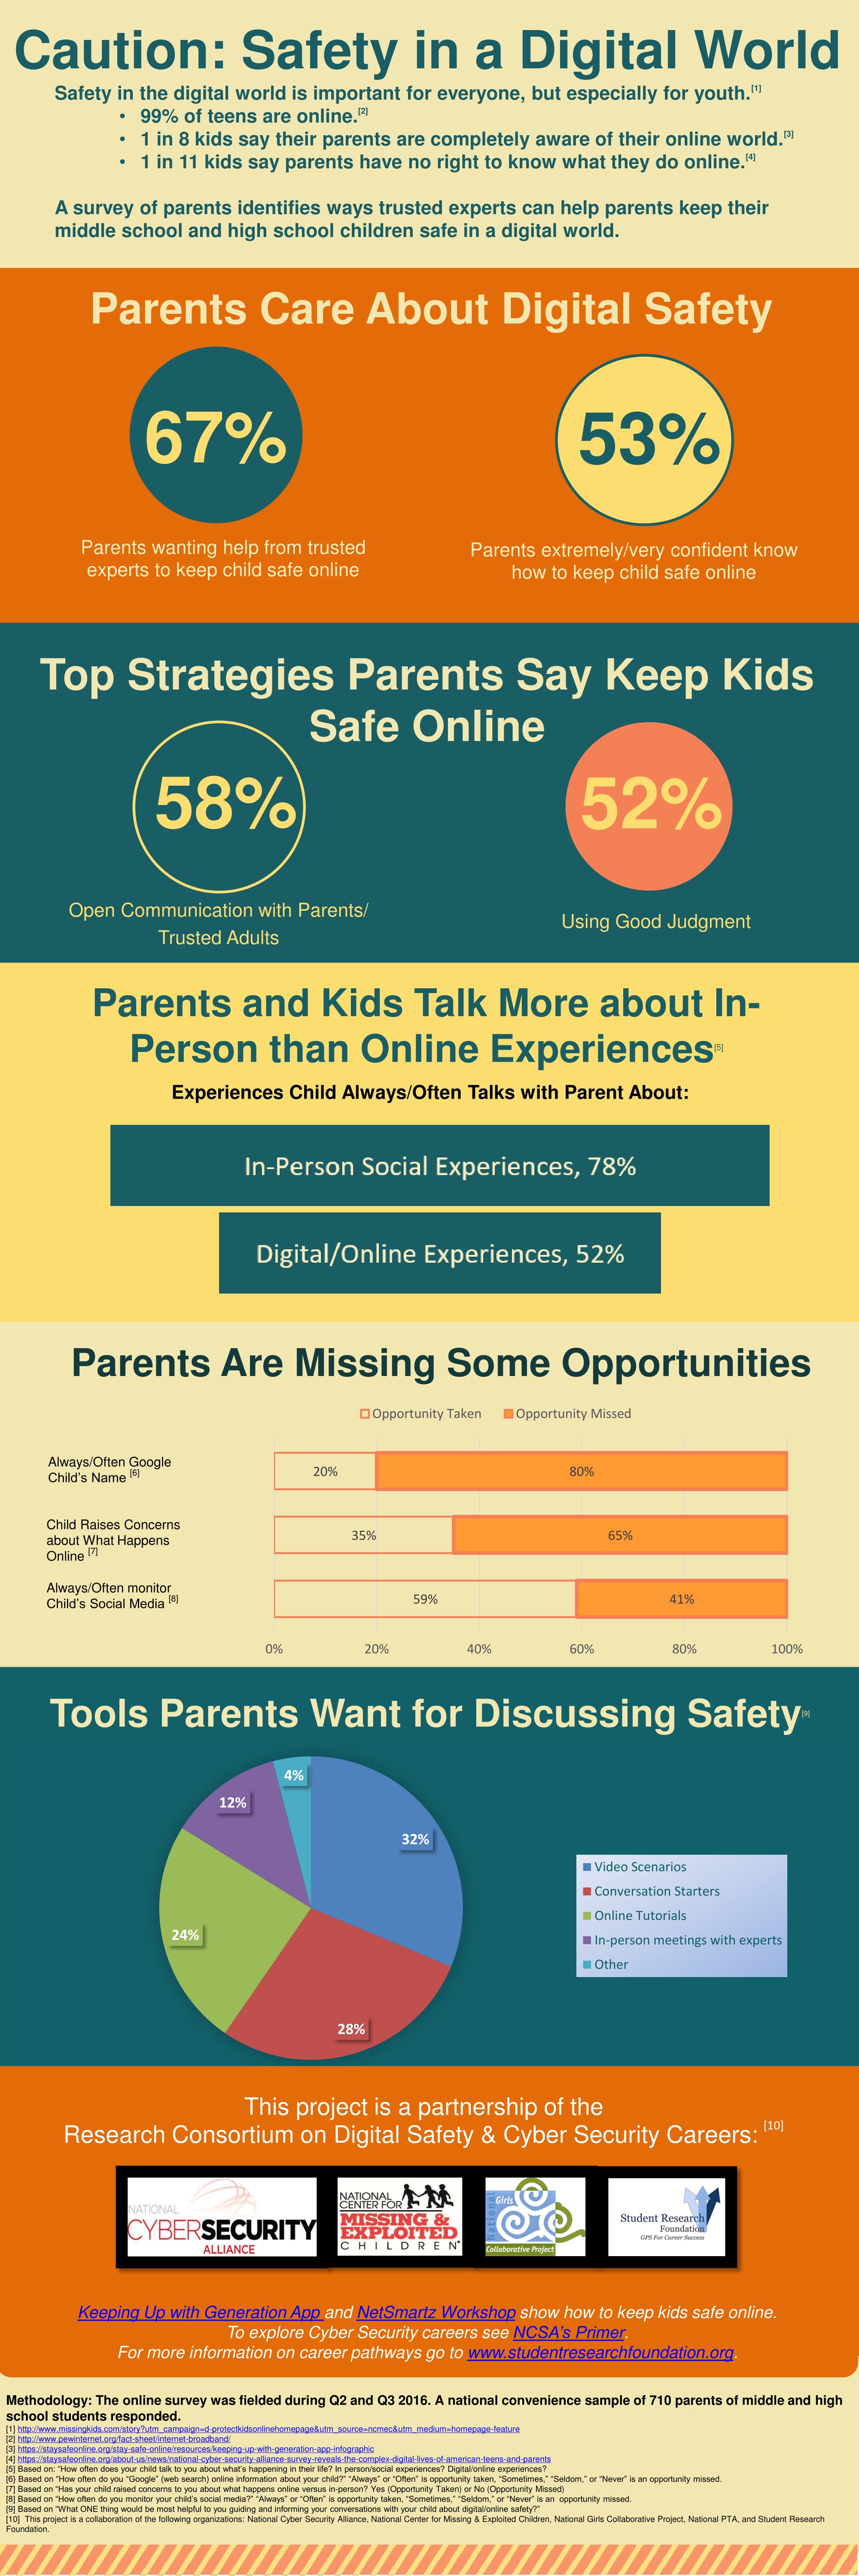 Research on Cyber Security and Protecting Children Online - Student Research Foundation 